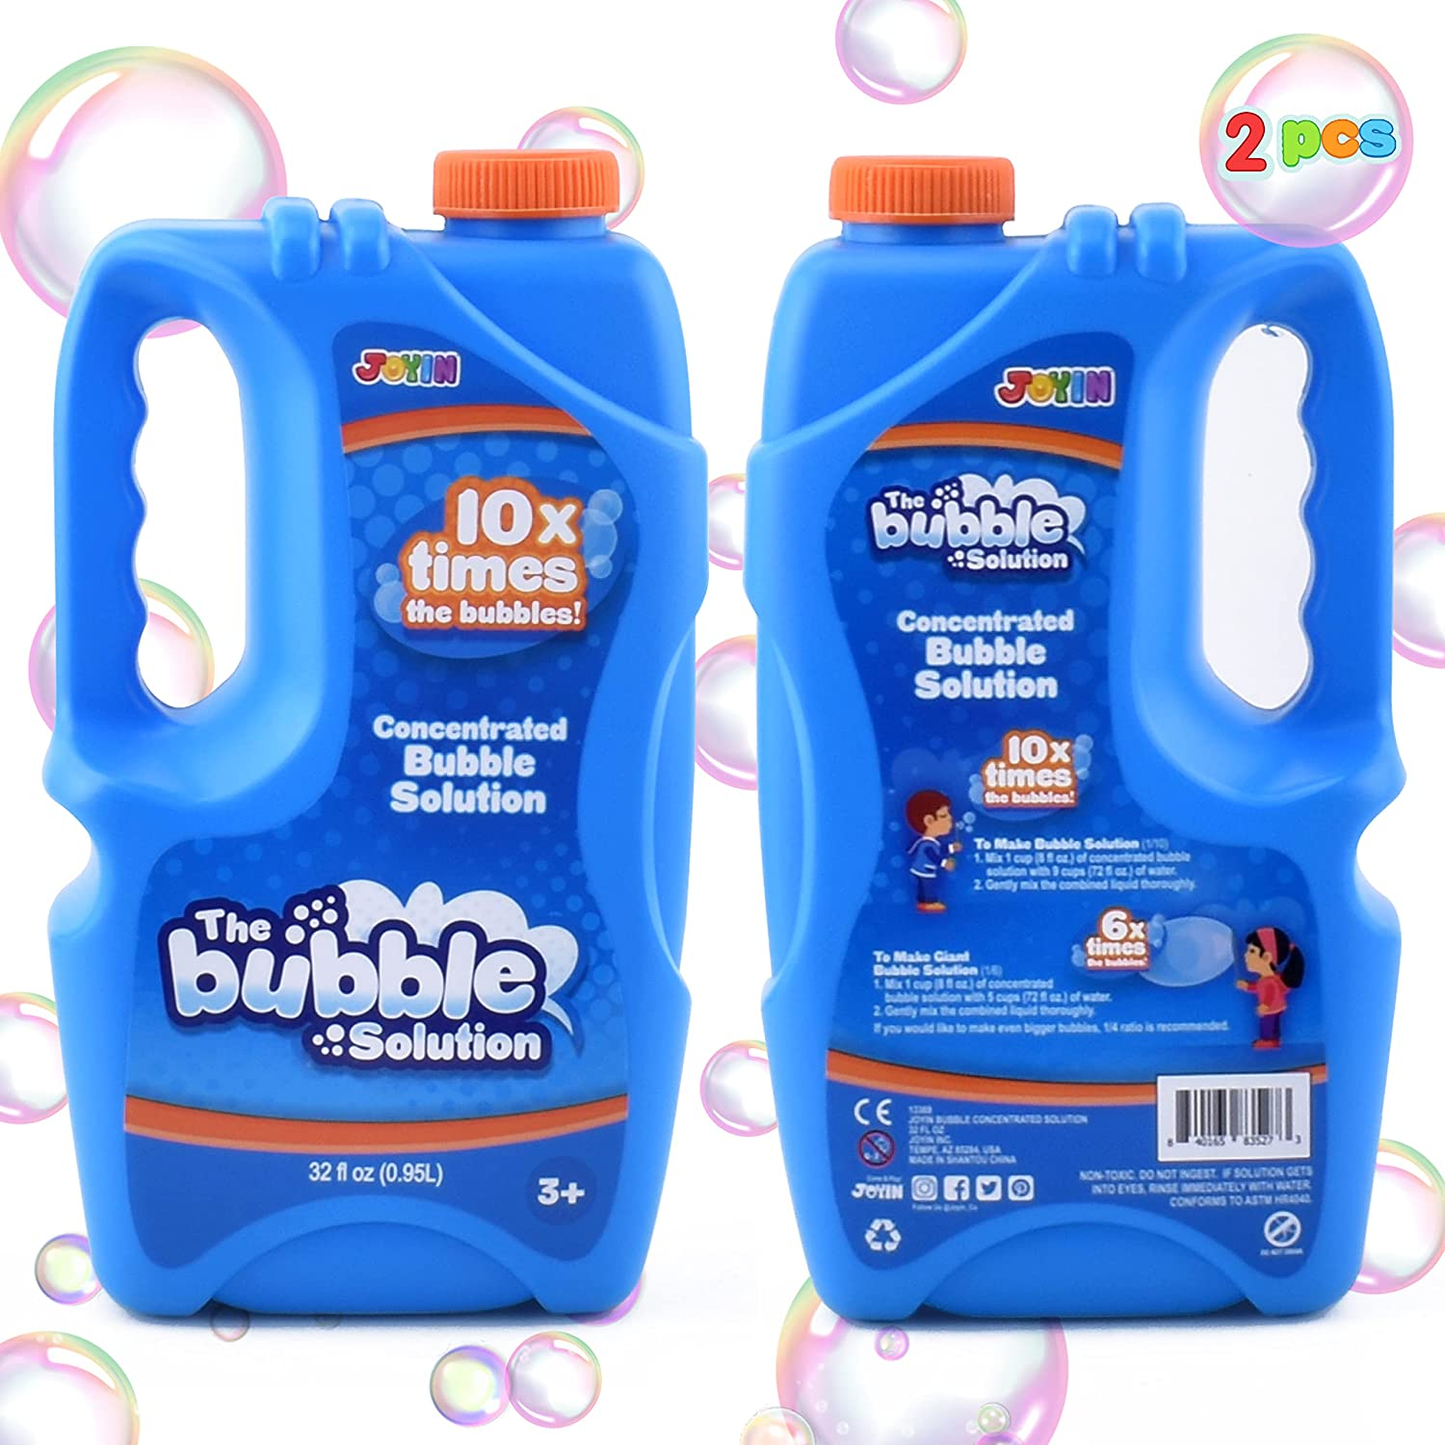 JOYIN 2 Bottles Bubbles Refill Solutions 64 Oz (Up to 5 Gallon) Big Bubble Solution 64 OZ Concentrated Bubble Solution for Bubble Machine, Gun, Wand Refill Fluid Summer, Easter Toys (Blue)